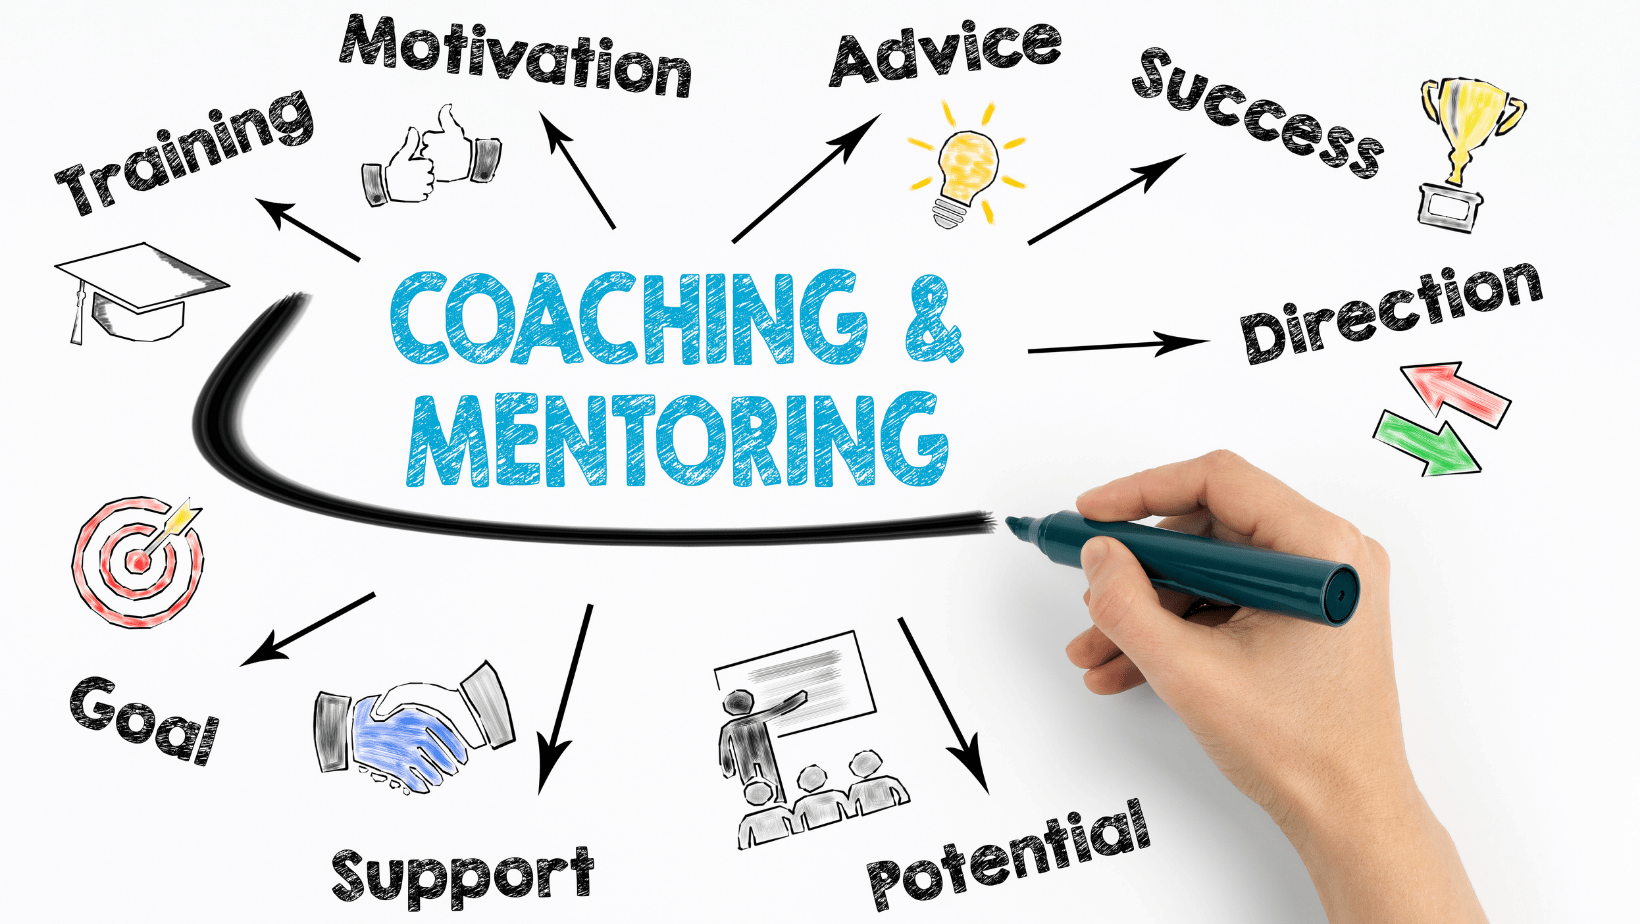 Why is Coaching Very Important? Business Academia